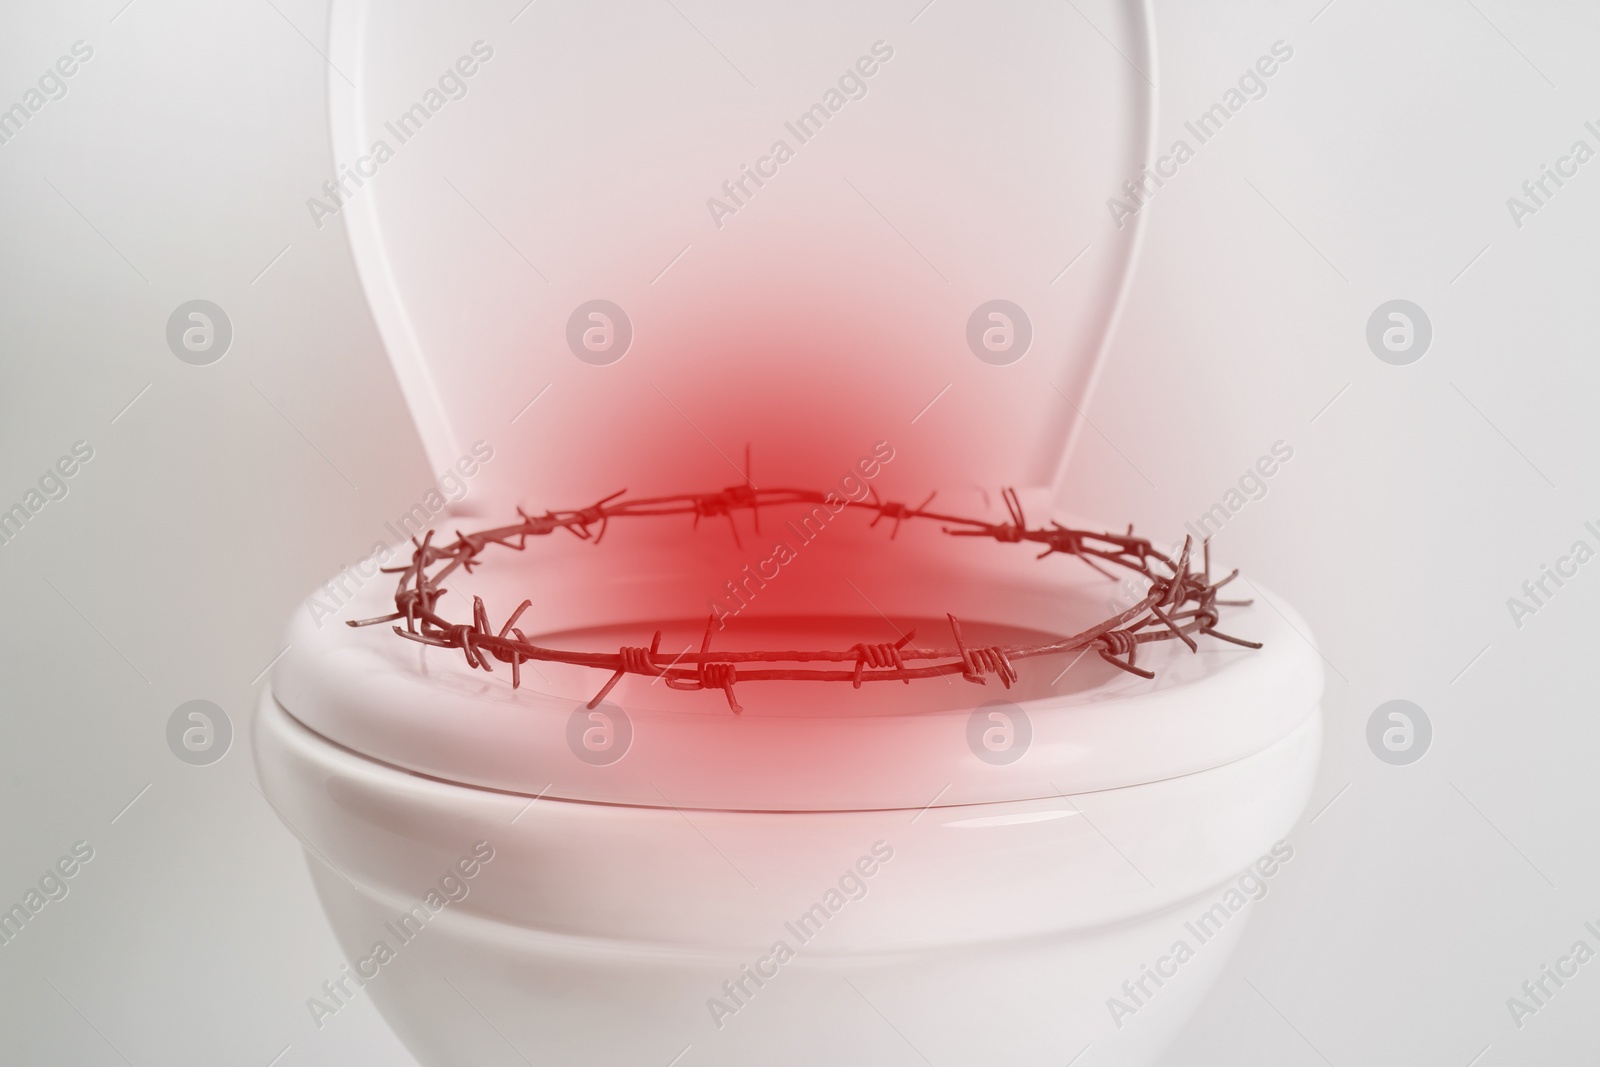 Image of Hemorrhoid concept. Toilet bowl with barbed wire on white background